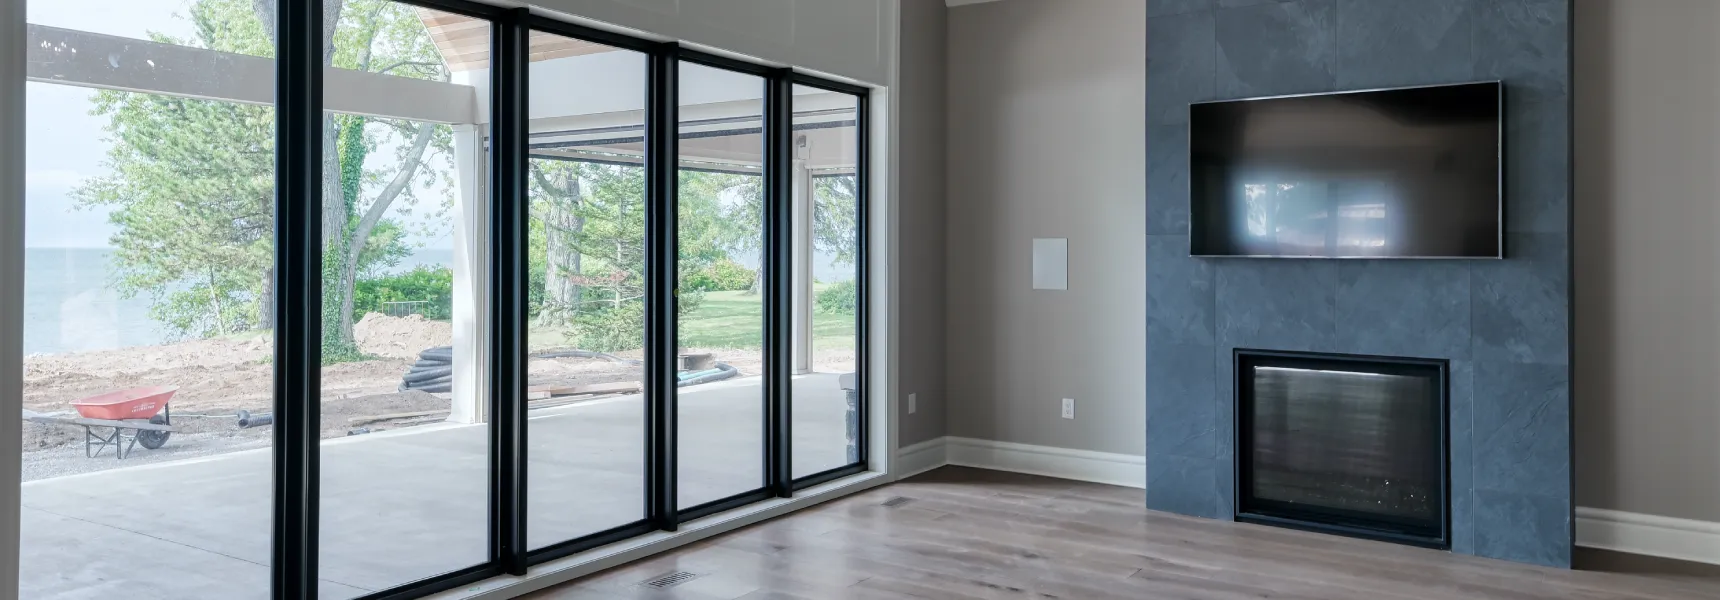 Aluminum windows and doors can amplify the look and feel